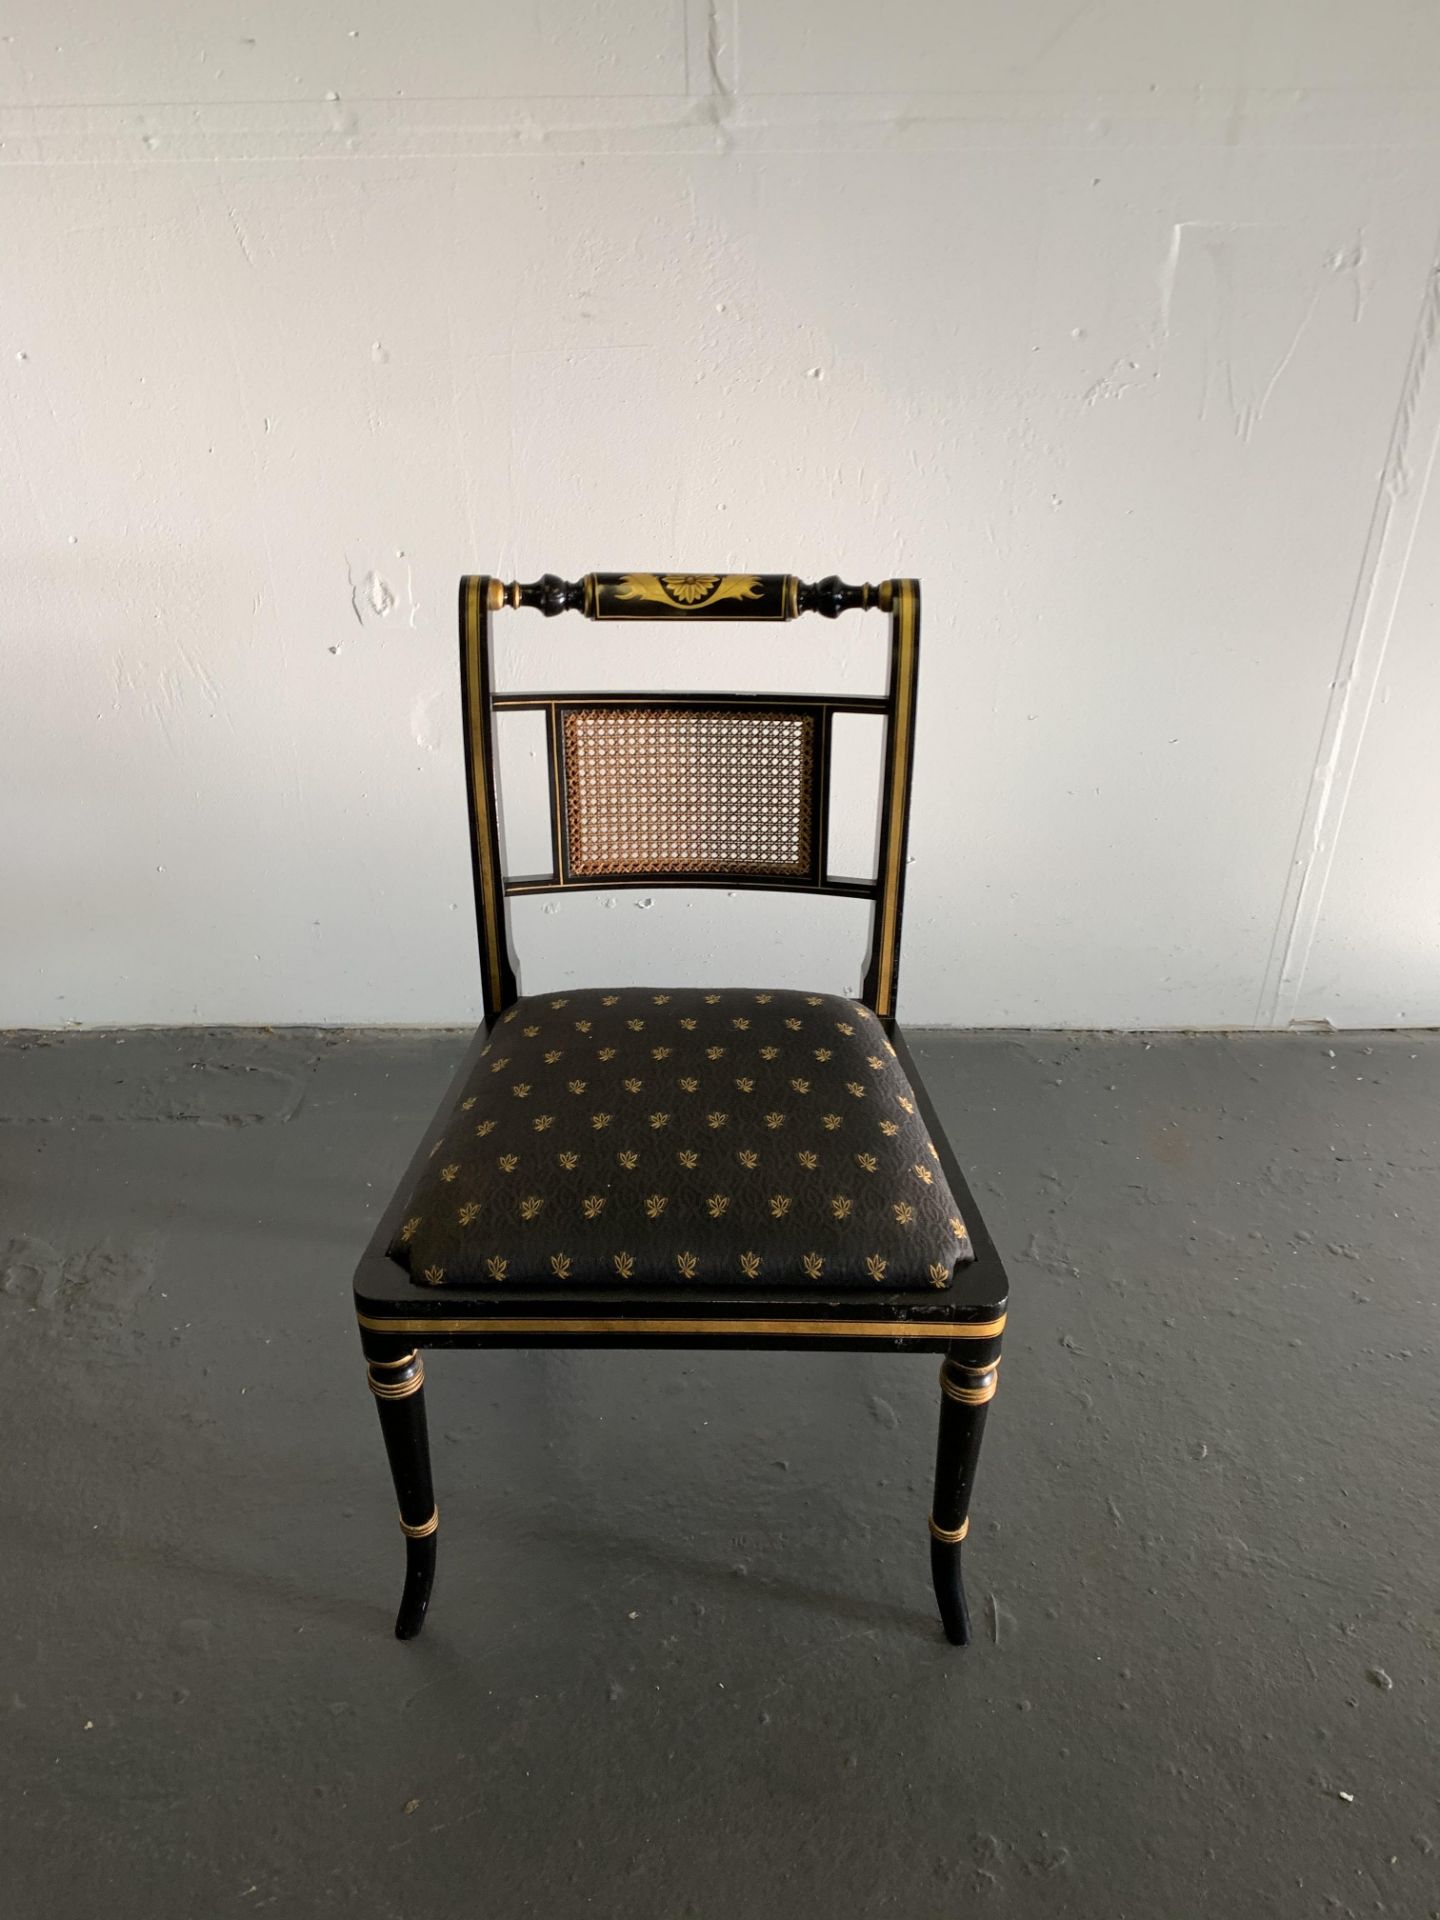 Ebony and Gold LEaf side Chair with top turned rail gold pattern pad detail - Image 4 of 4